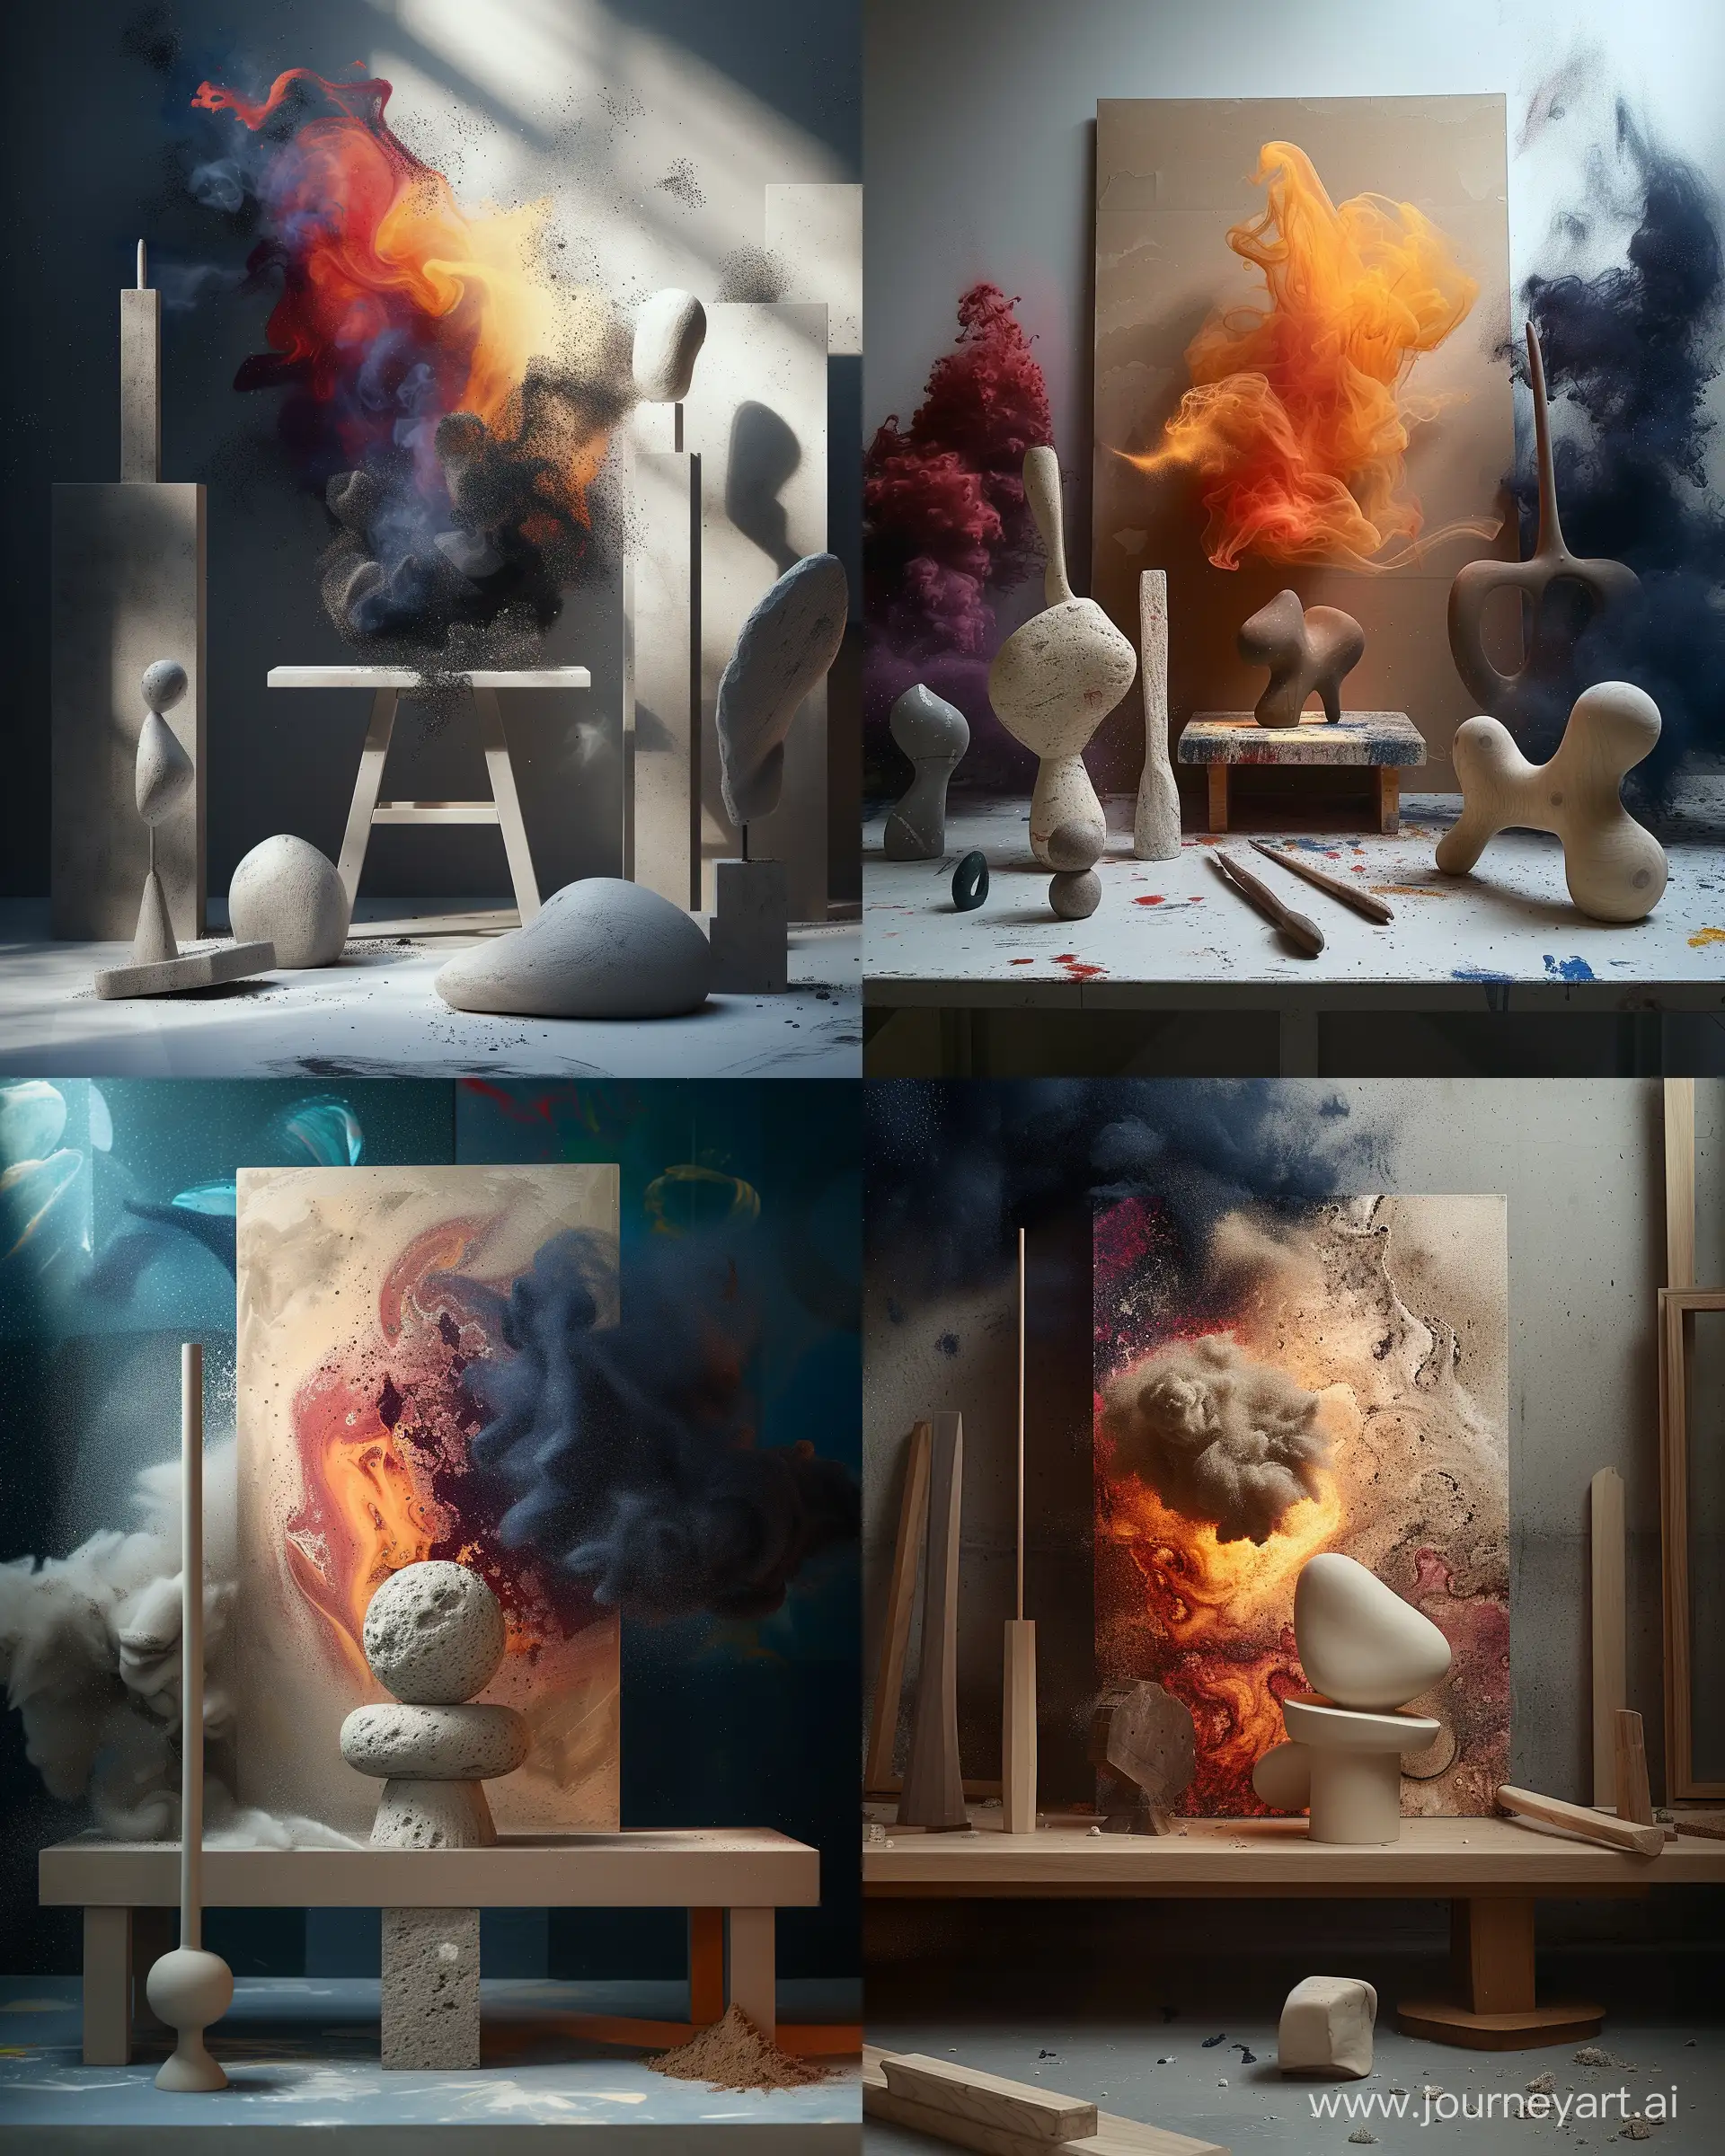 https://i.postimg.cc/3J3S7nmF/1706629472670sad5lzm21a4j-copy.png, abstract atmosphere with sculptures --ar 4:5